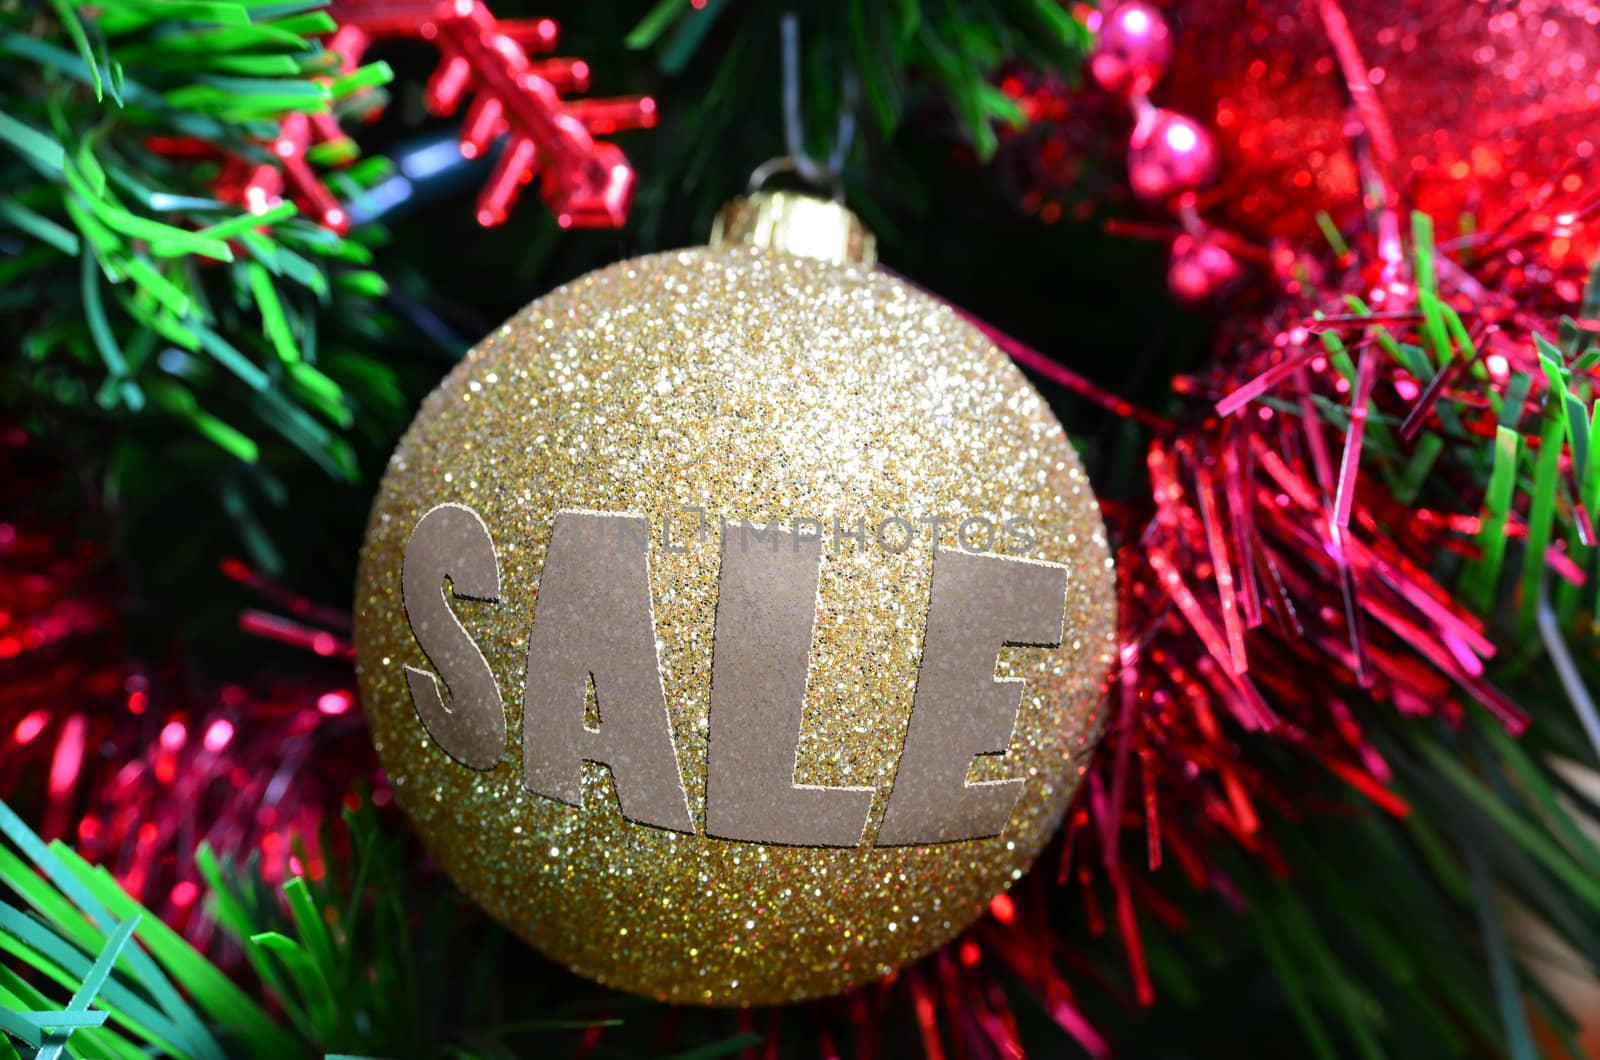 Golden Christmas ball with sale written on it